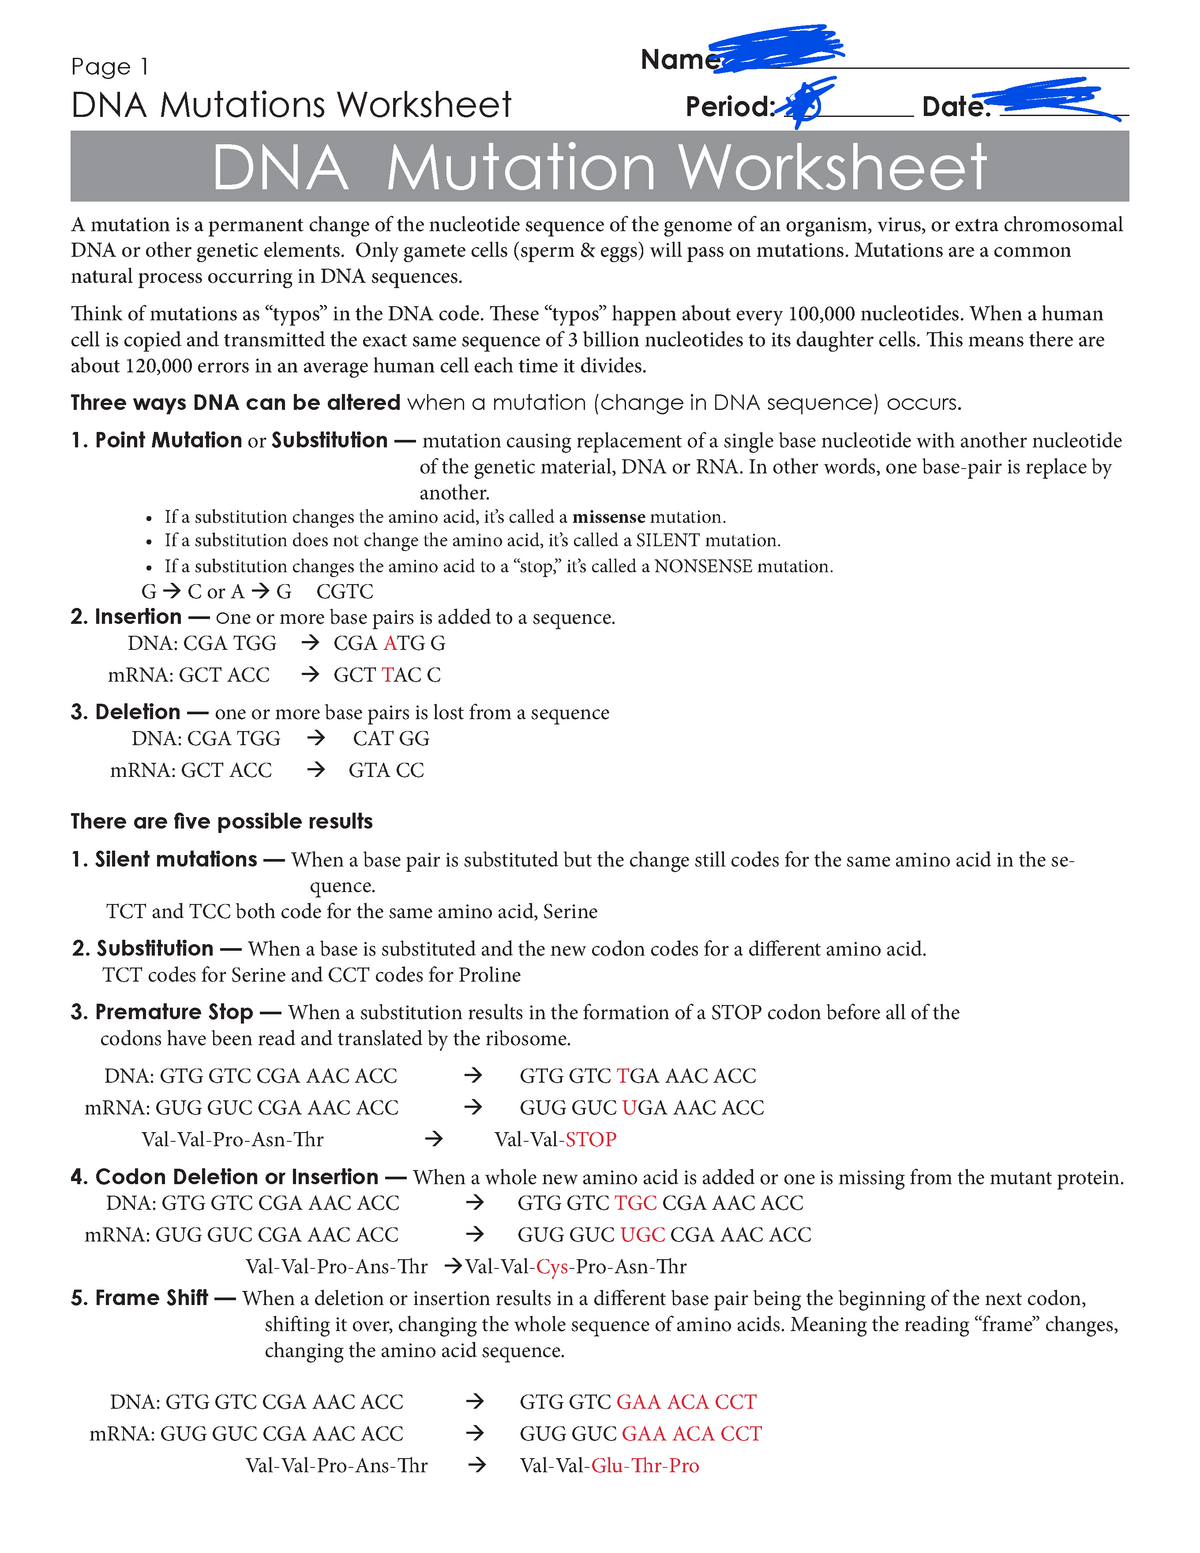 Kami Export - dna mutations worksheet - Actuarial Science - StuDocu Within Dna Mutations Practice Worksheet Answer